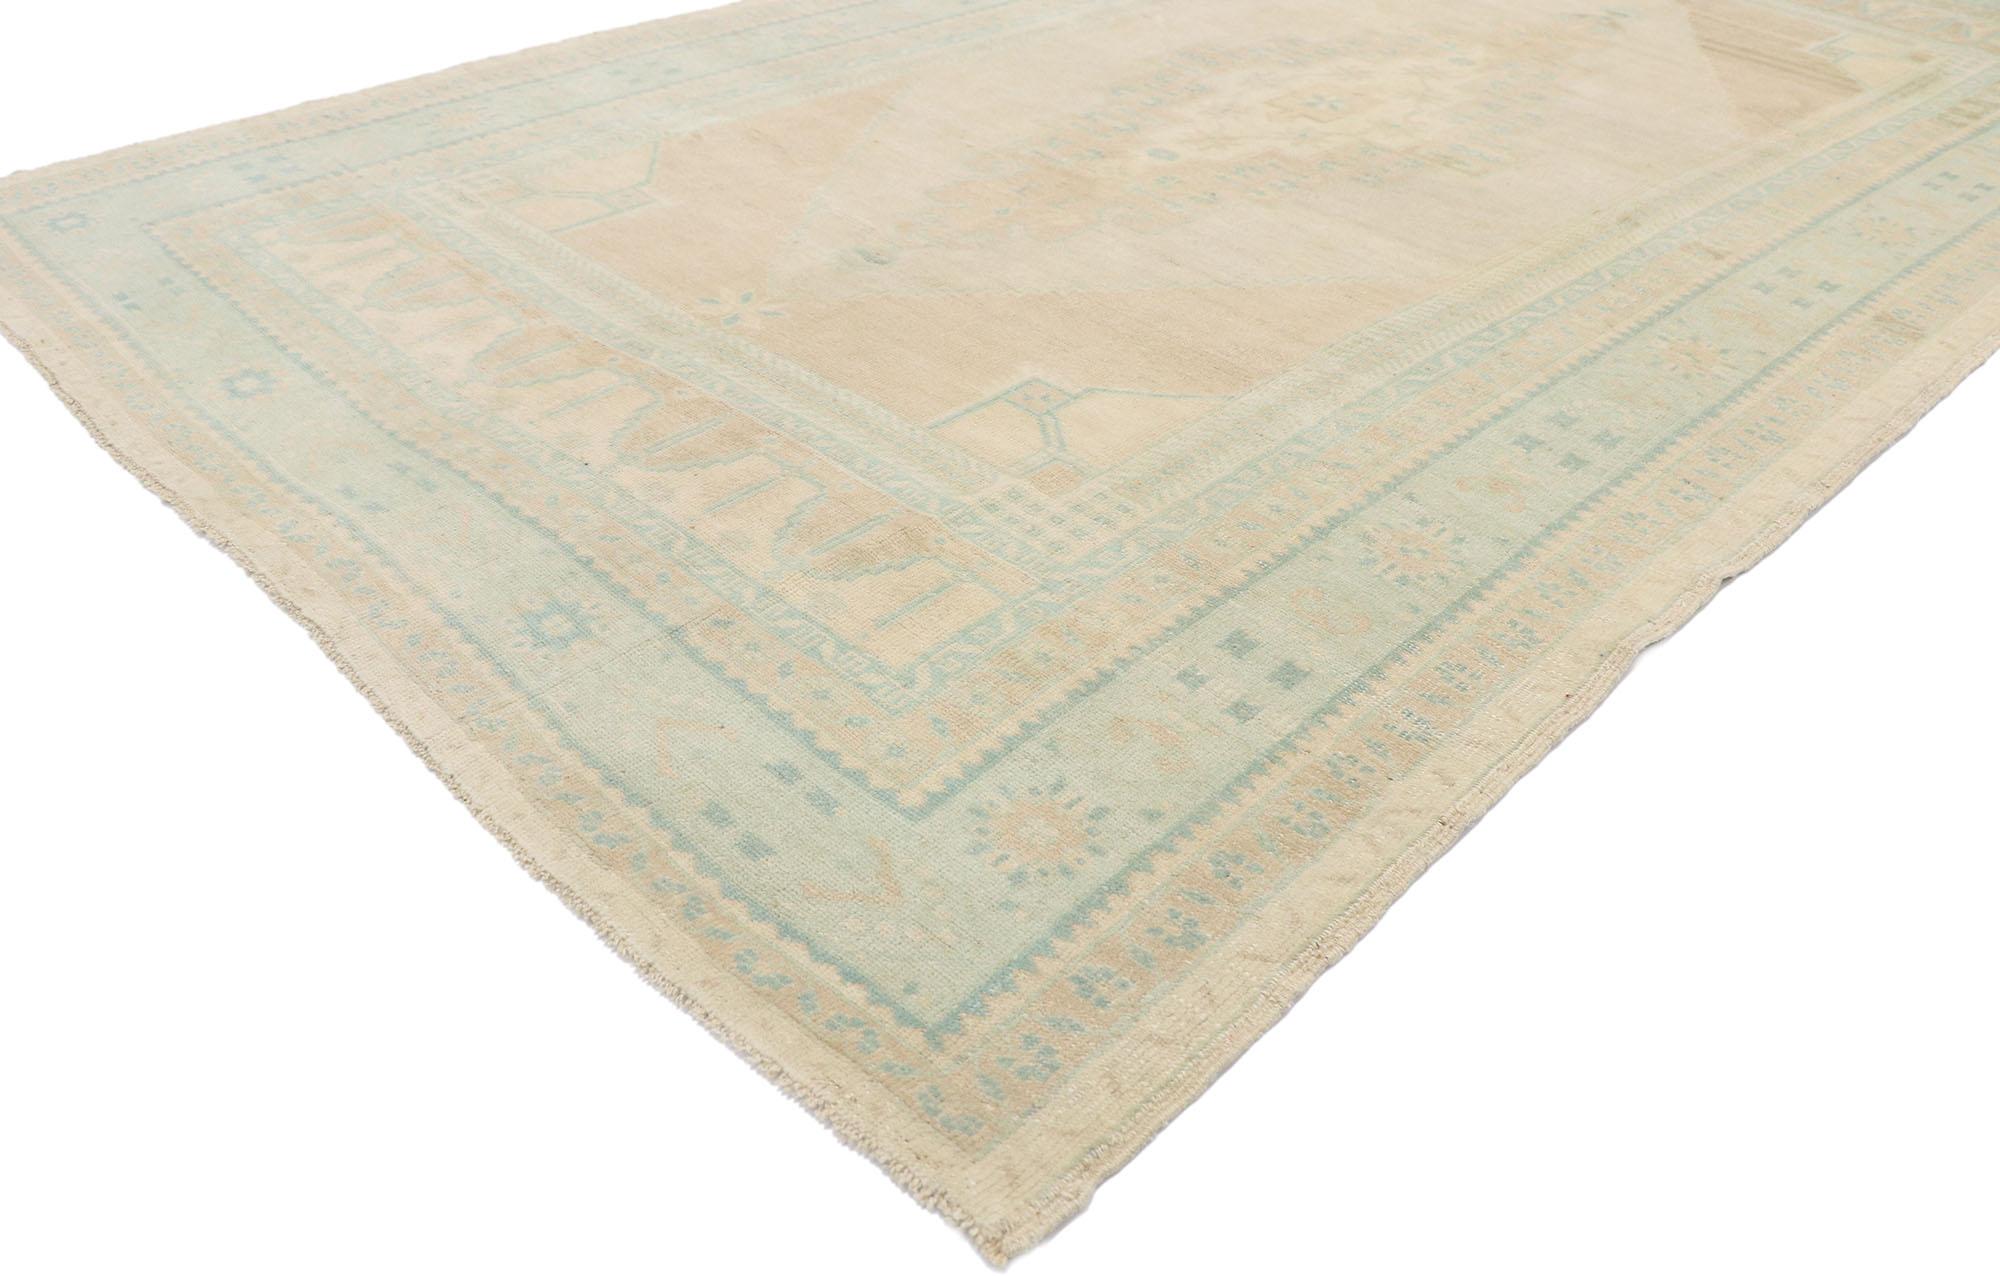 53559, vintage Turkish Oushak rug with Swedish Gustavian style. Drawing inspiration from Swedish simplicity and Gustavian grace, this hand knotted wool Turkish Oushak rug displays nostalgic charm and inimitable warmth. The abrashed tan field